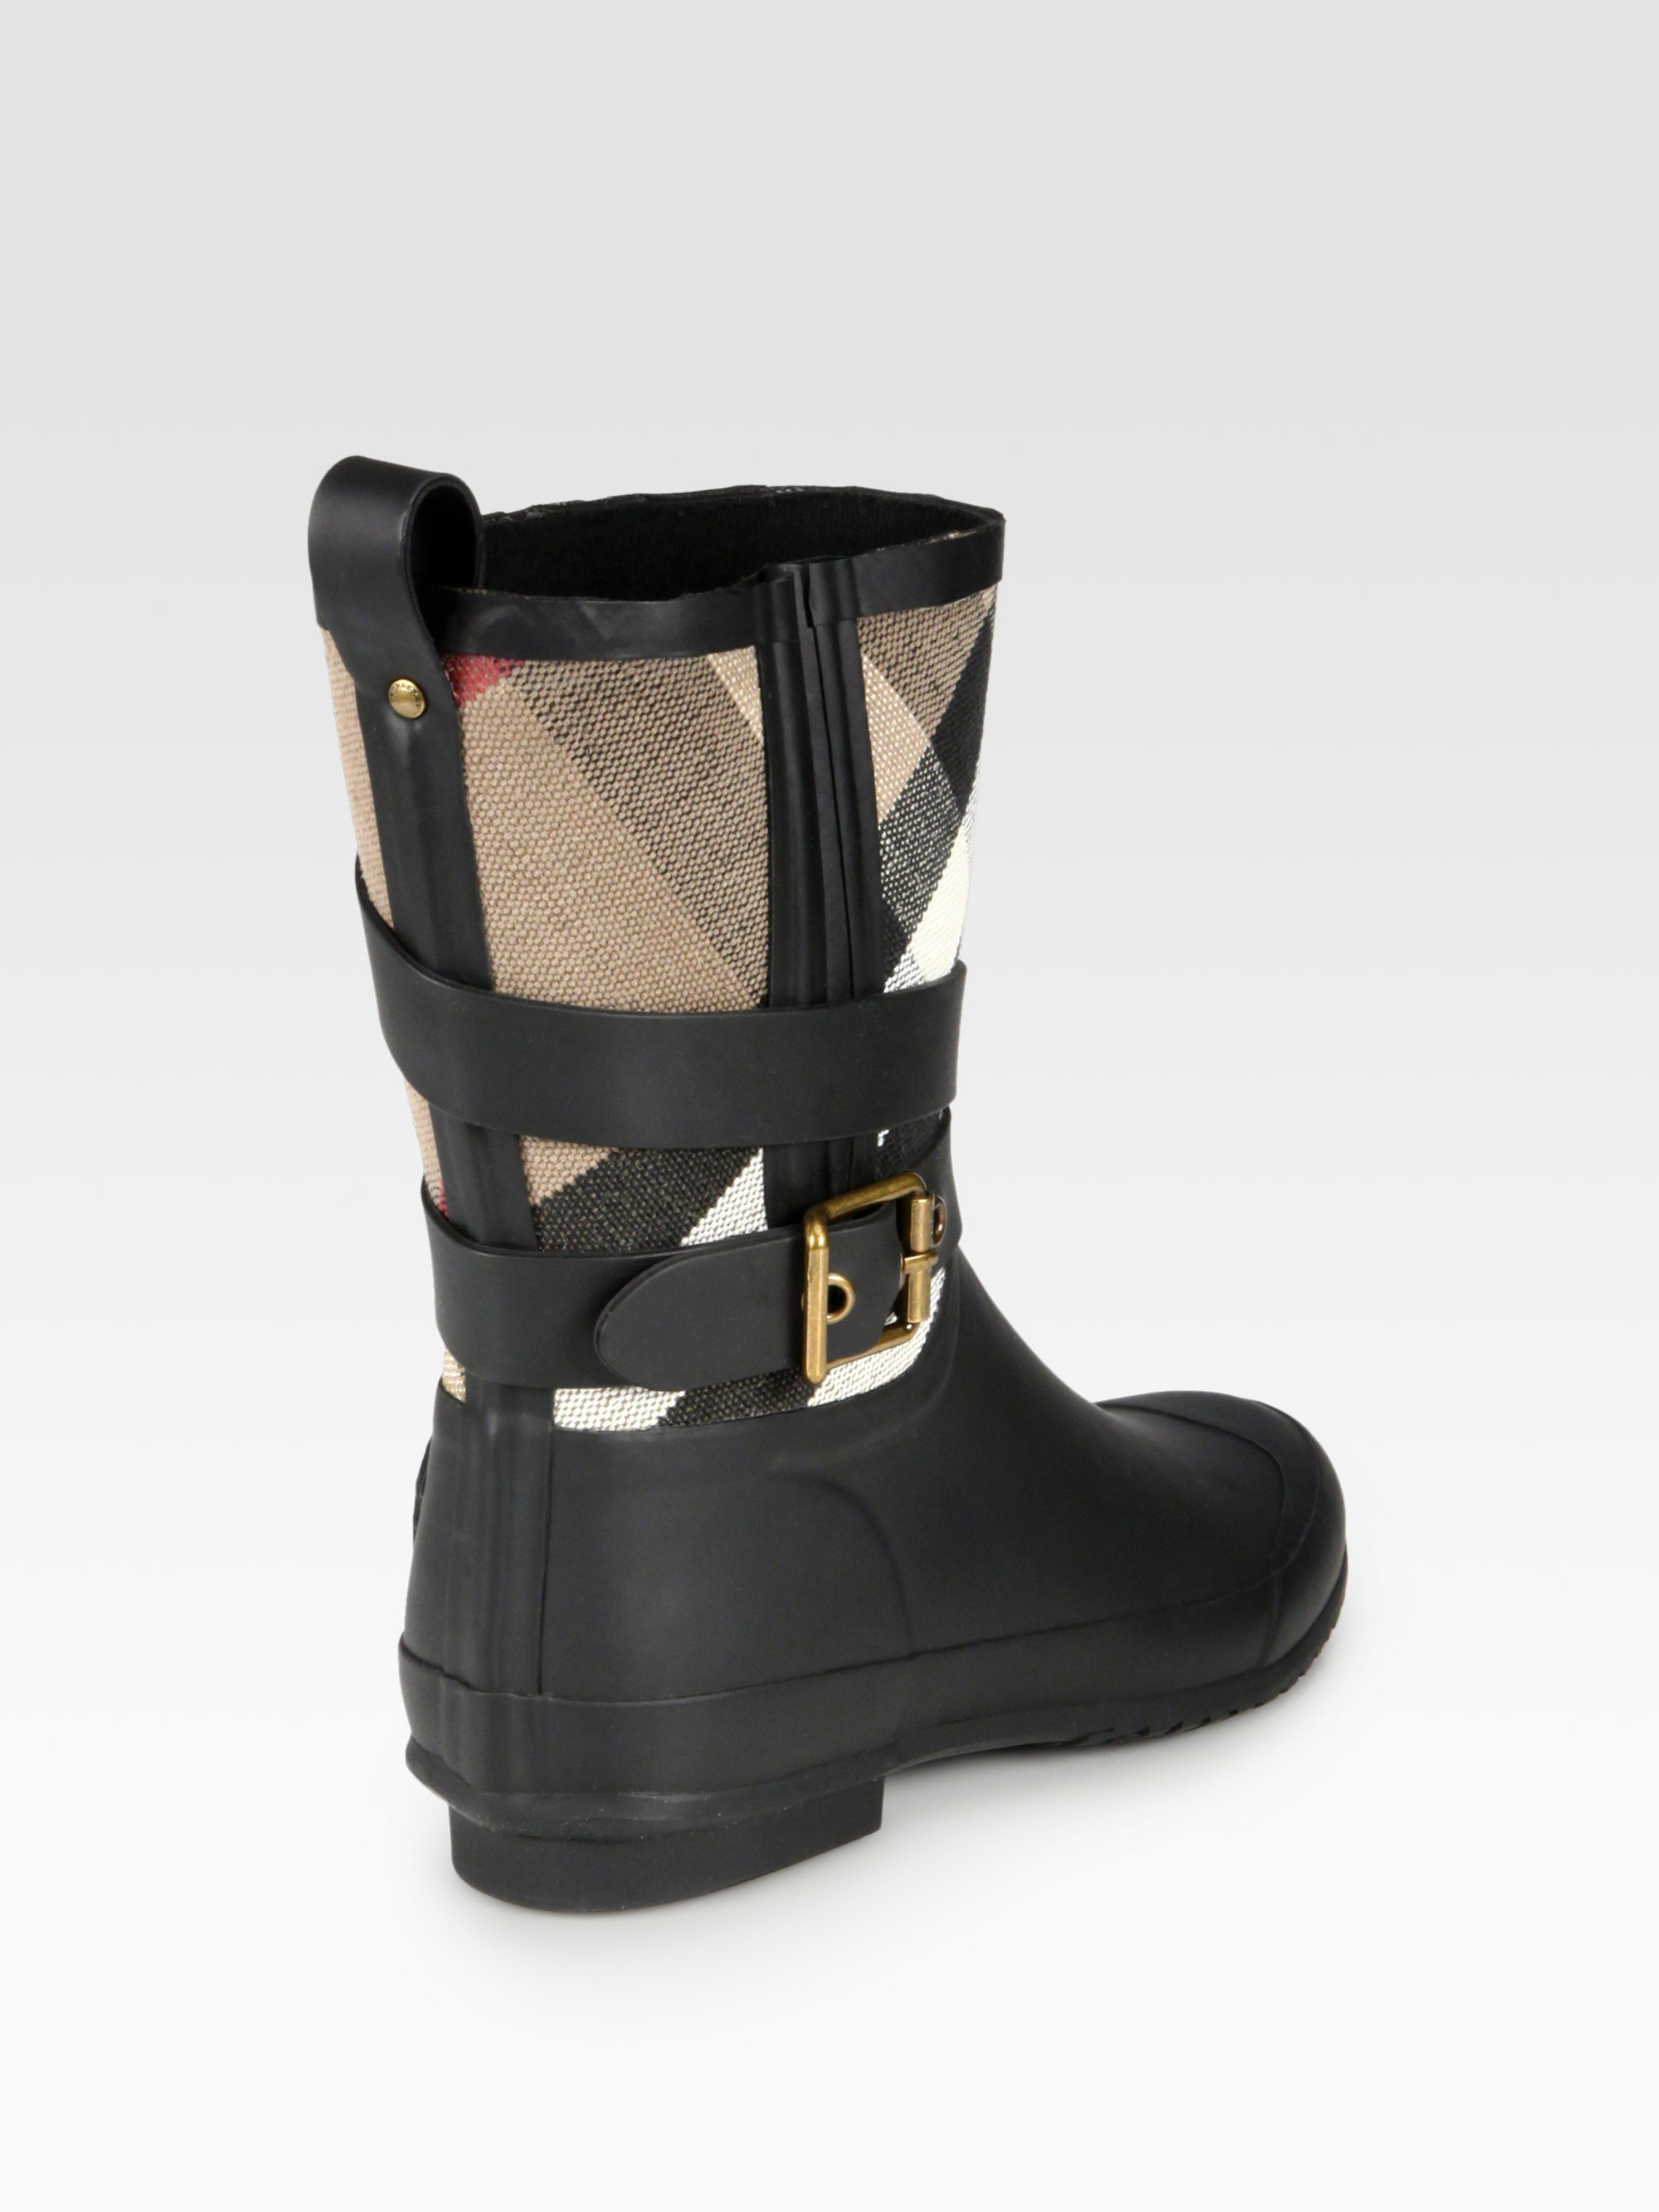 Burberry Holloway Canvas Rain Boots in Black | Lyst